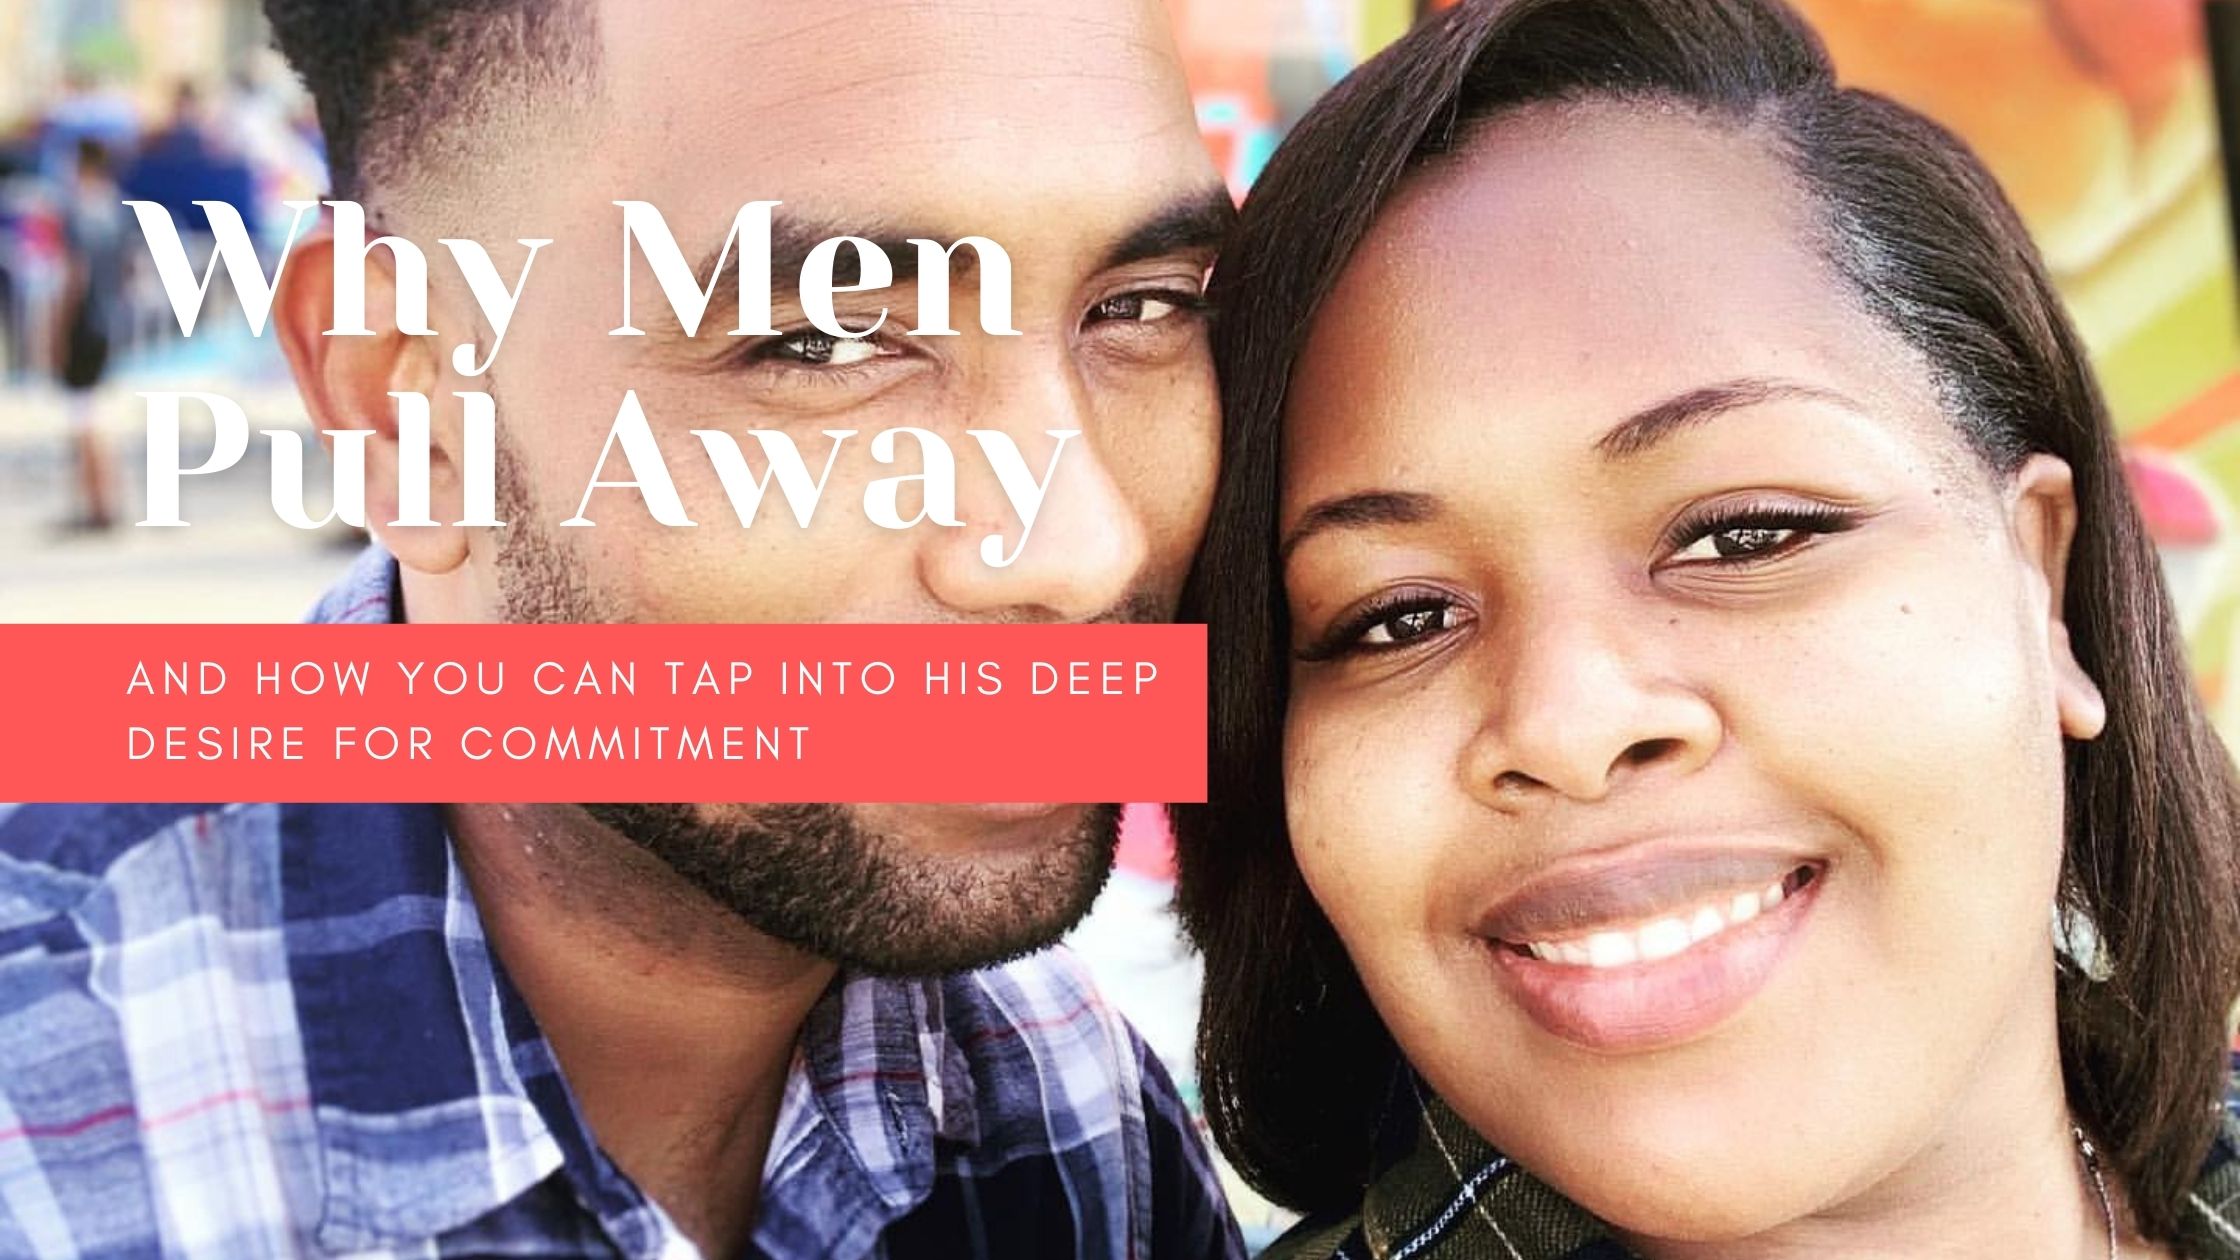 Why Men Pull Away And How You Can Tap Into His Deep Desire For Commitment